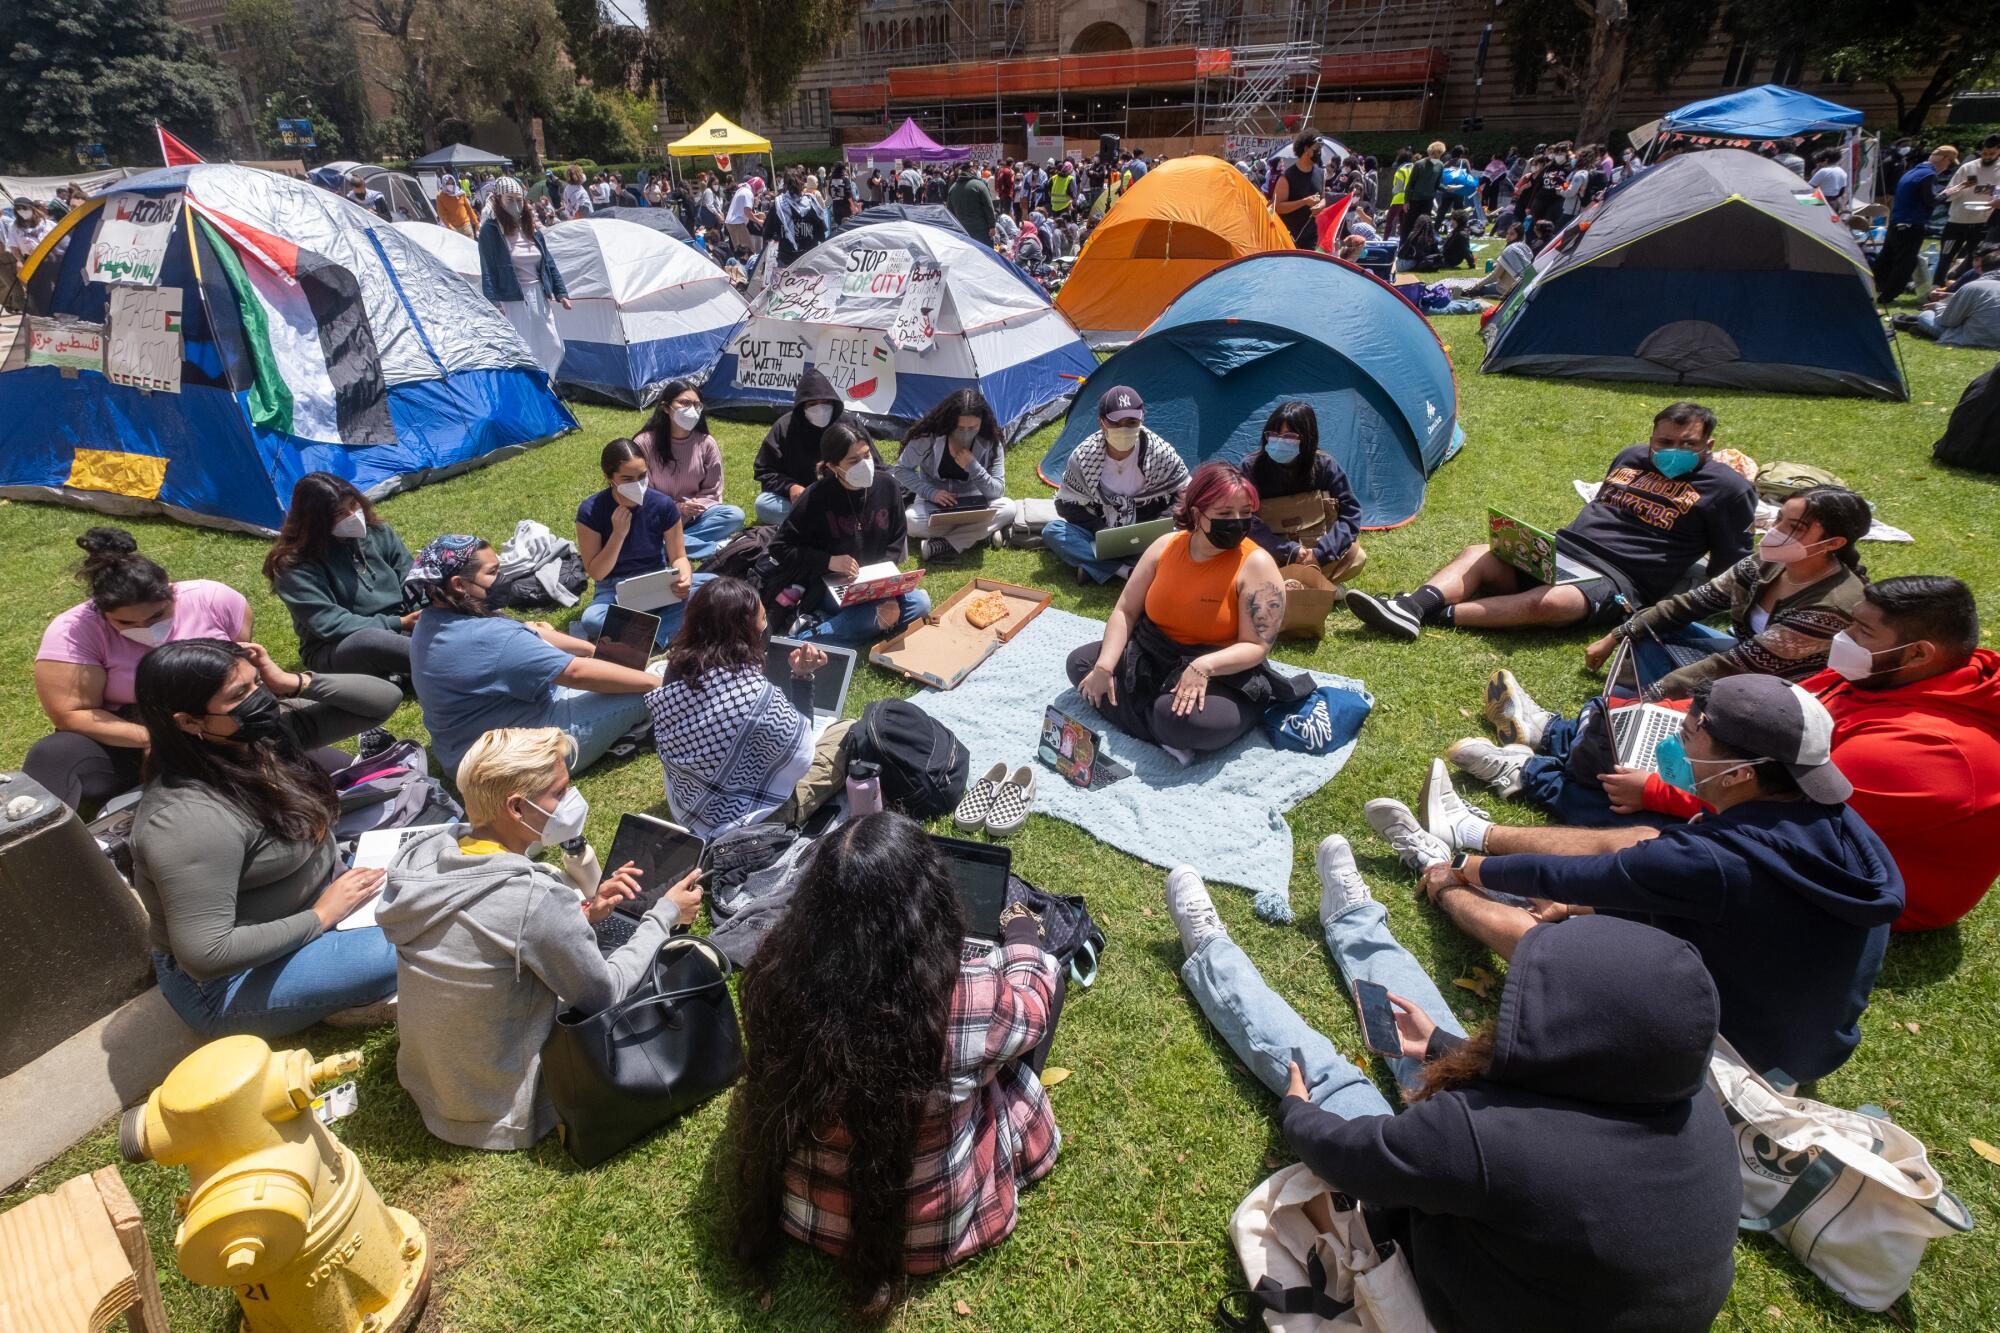 Pro-Palestine protesters gather at an encampment on the campus of UCLA.